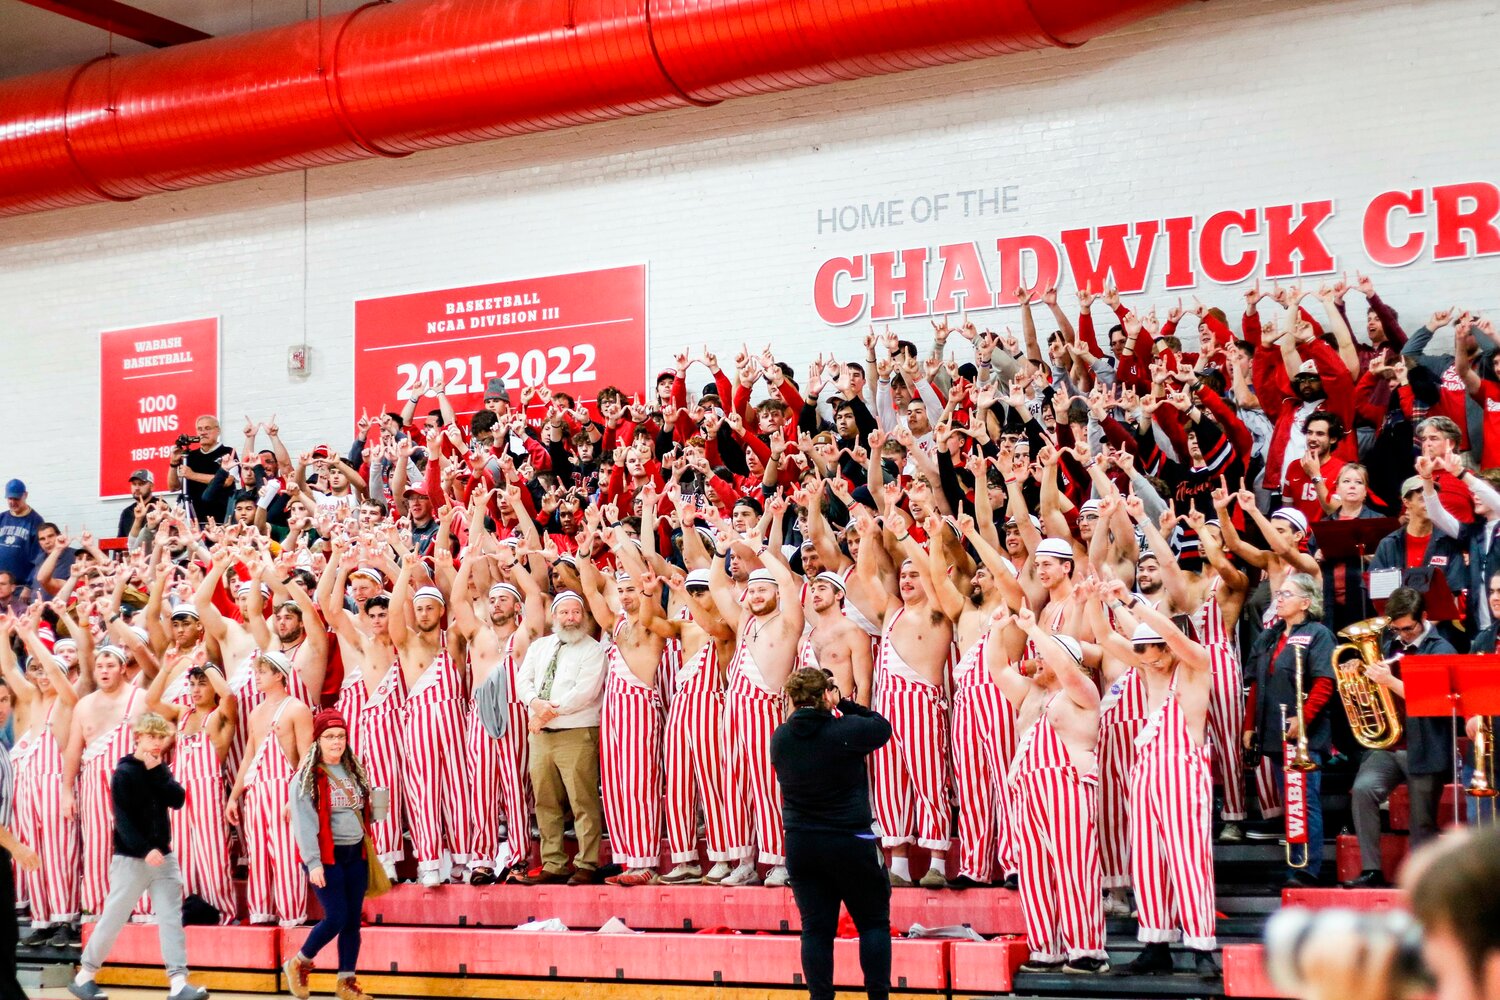 Coach Kyle Brumett asked for the Chadwick Crazies and they delivered.